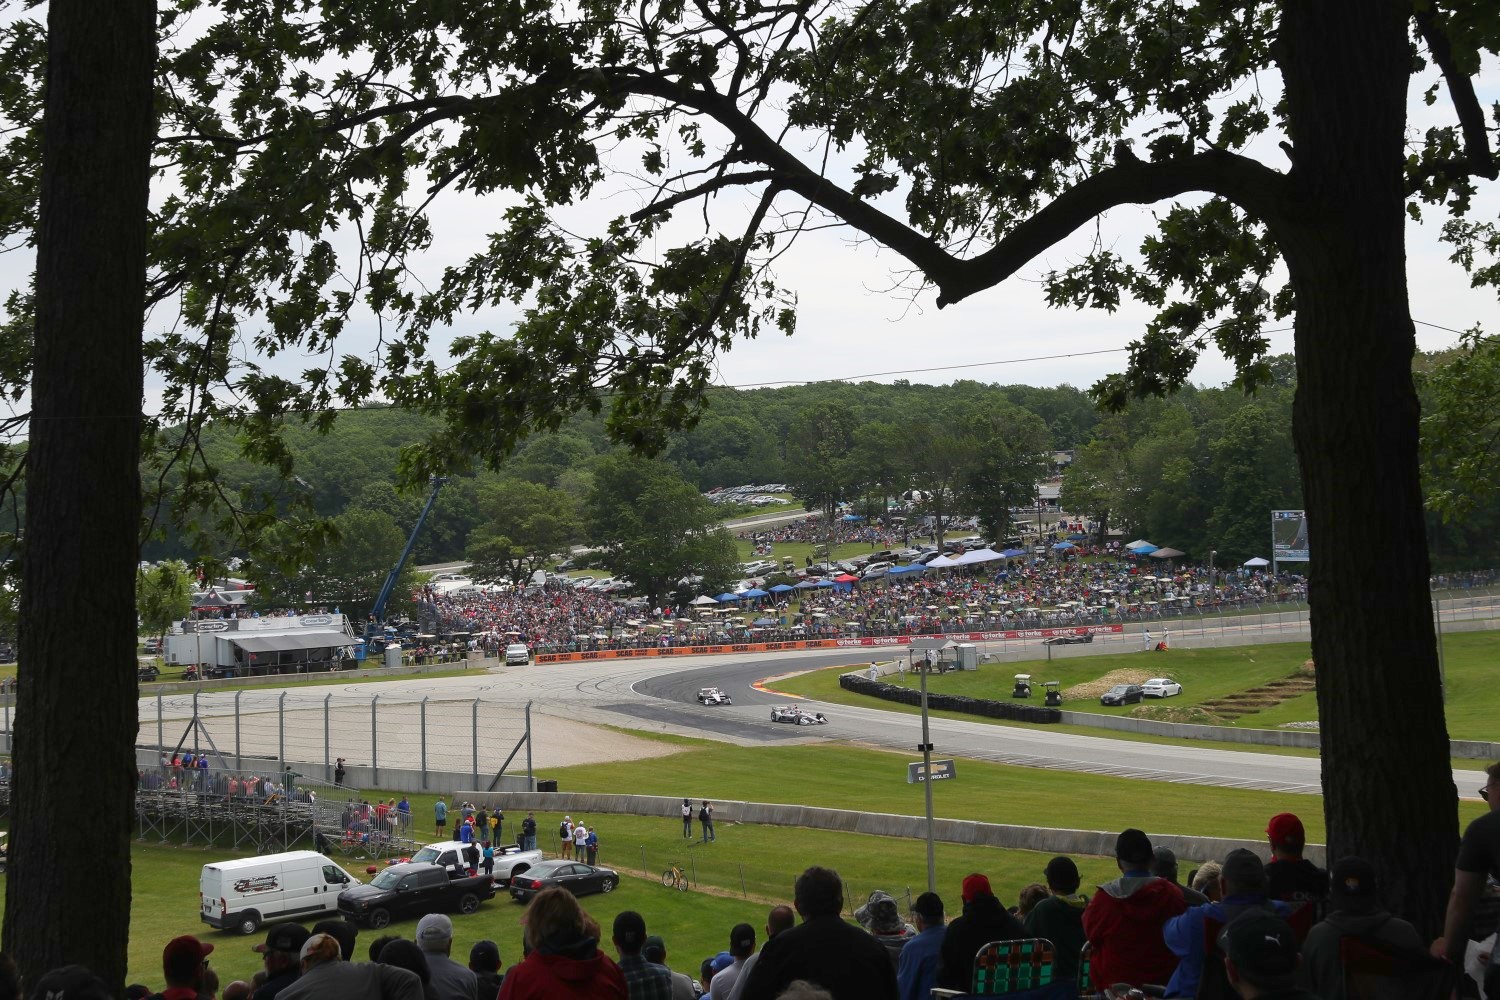 What appeared to be a record crowd was on hand. People were camping and in the trees all around the track